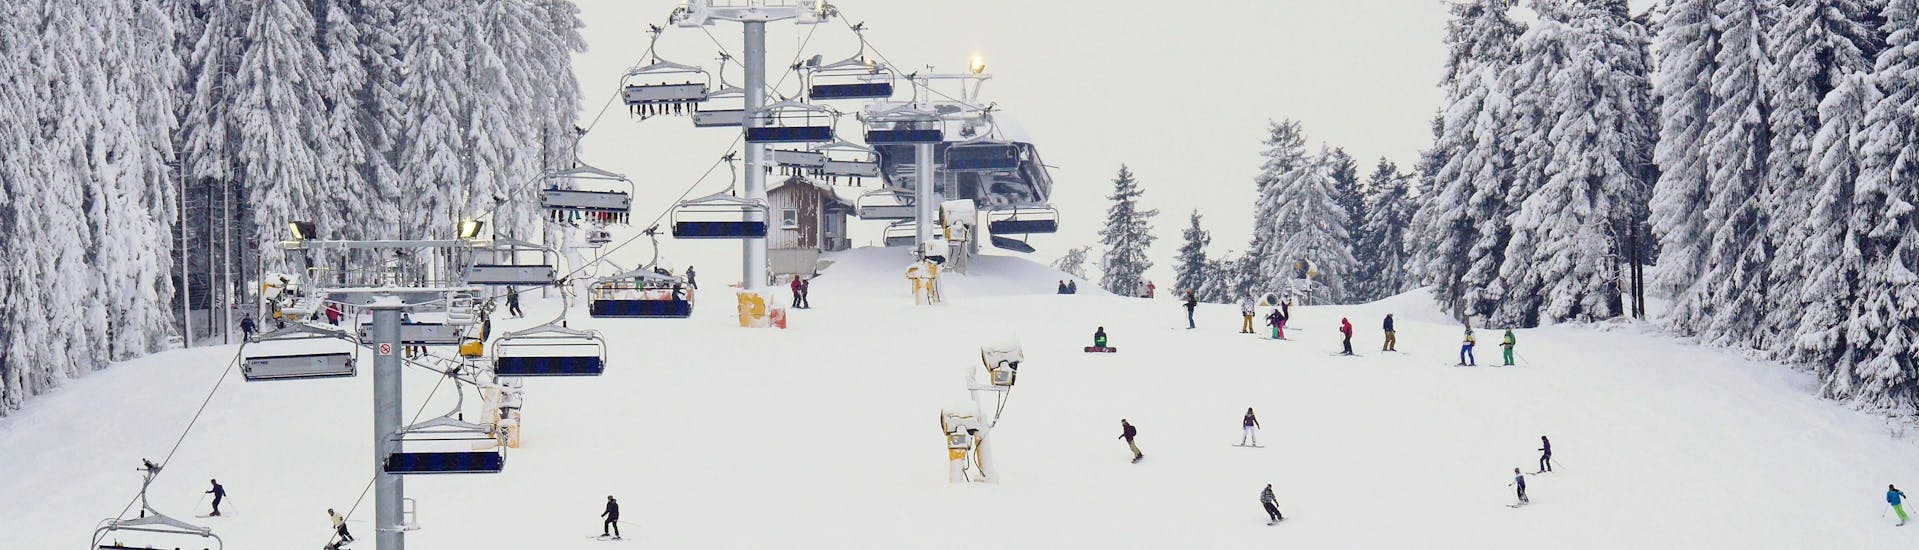 An image of skiers and snowboarders enjoying theimselves on the ski slope in Winterberg, where local ski schools offer a range of ski lessons to visitors who want to learn to ski.